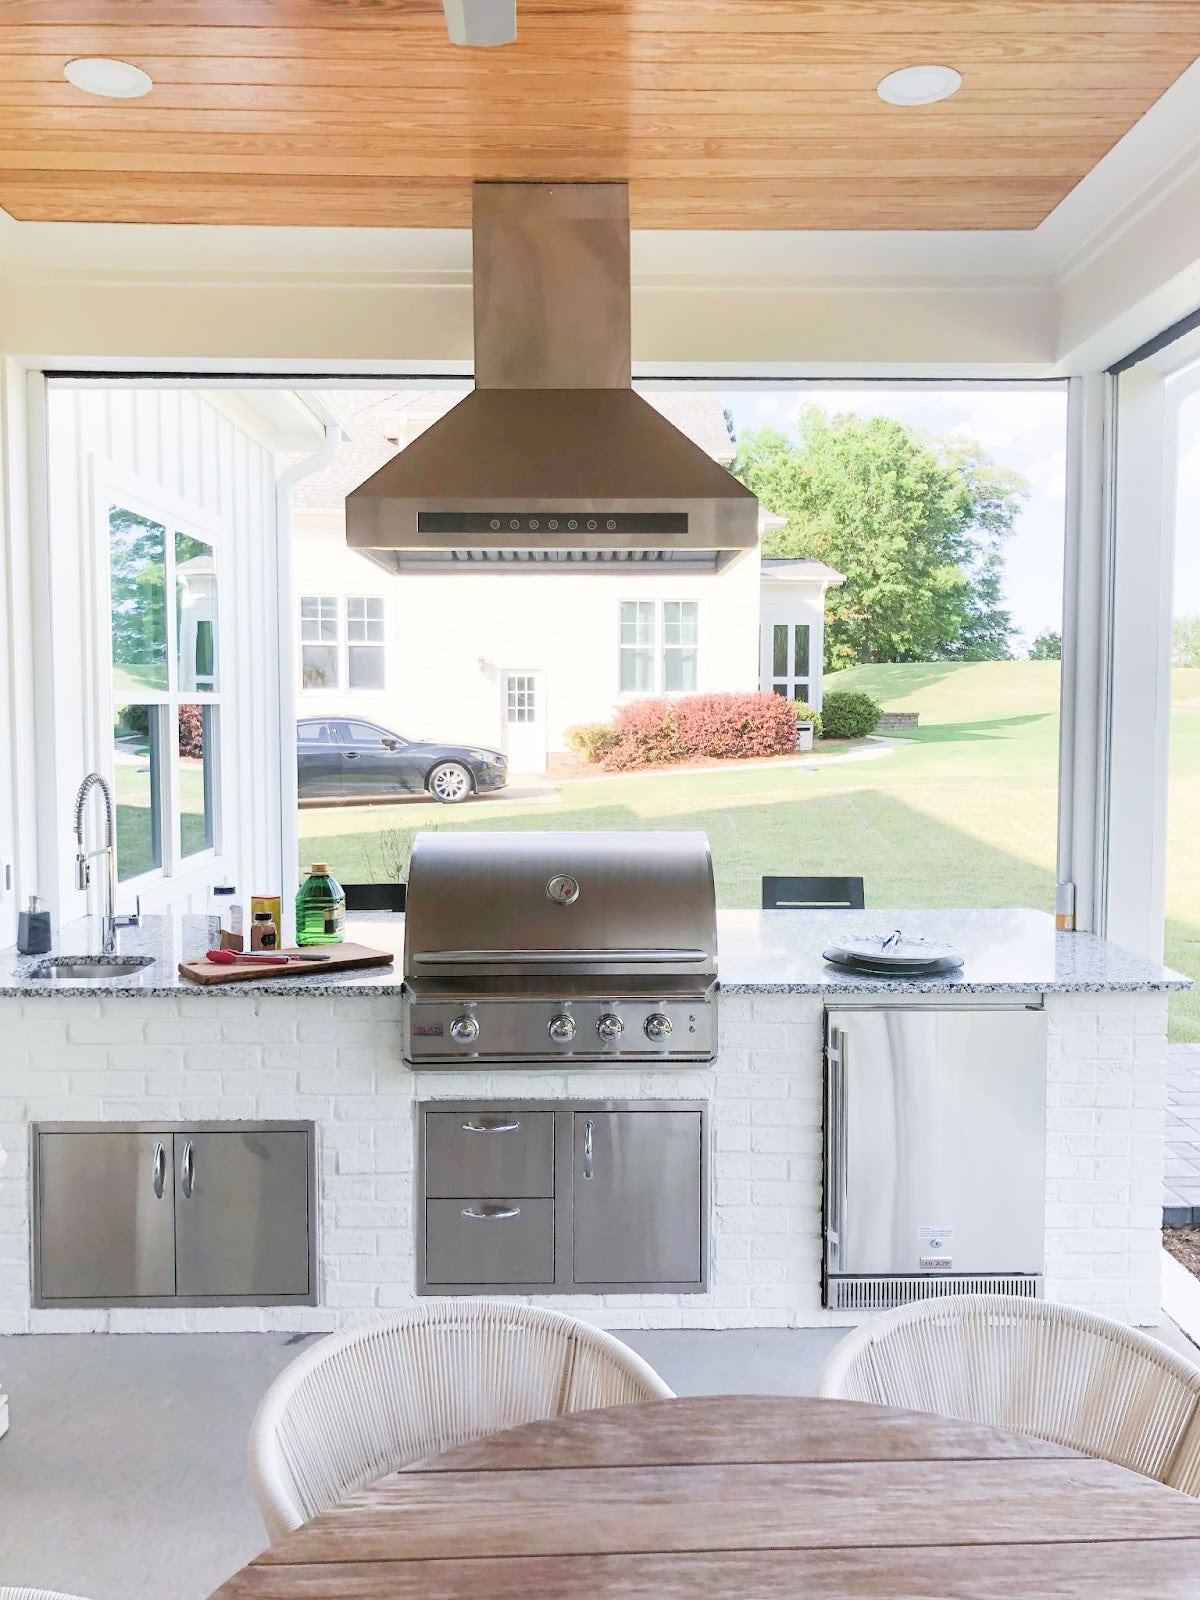 Sunlit patio kitchen with sleek appliances, including a grill and refrigerator, integrated into a clean white brick setting with a green lawn in the background. - Proline Range Hoods - prolinerangehoods.com 